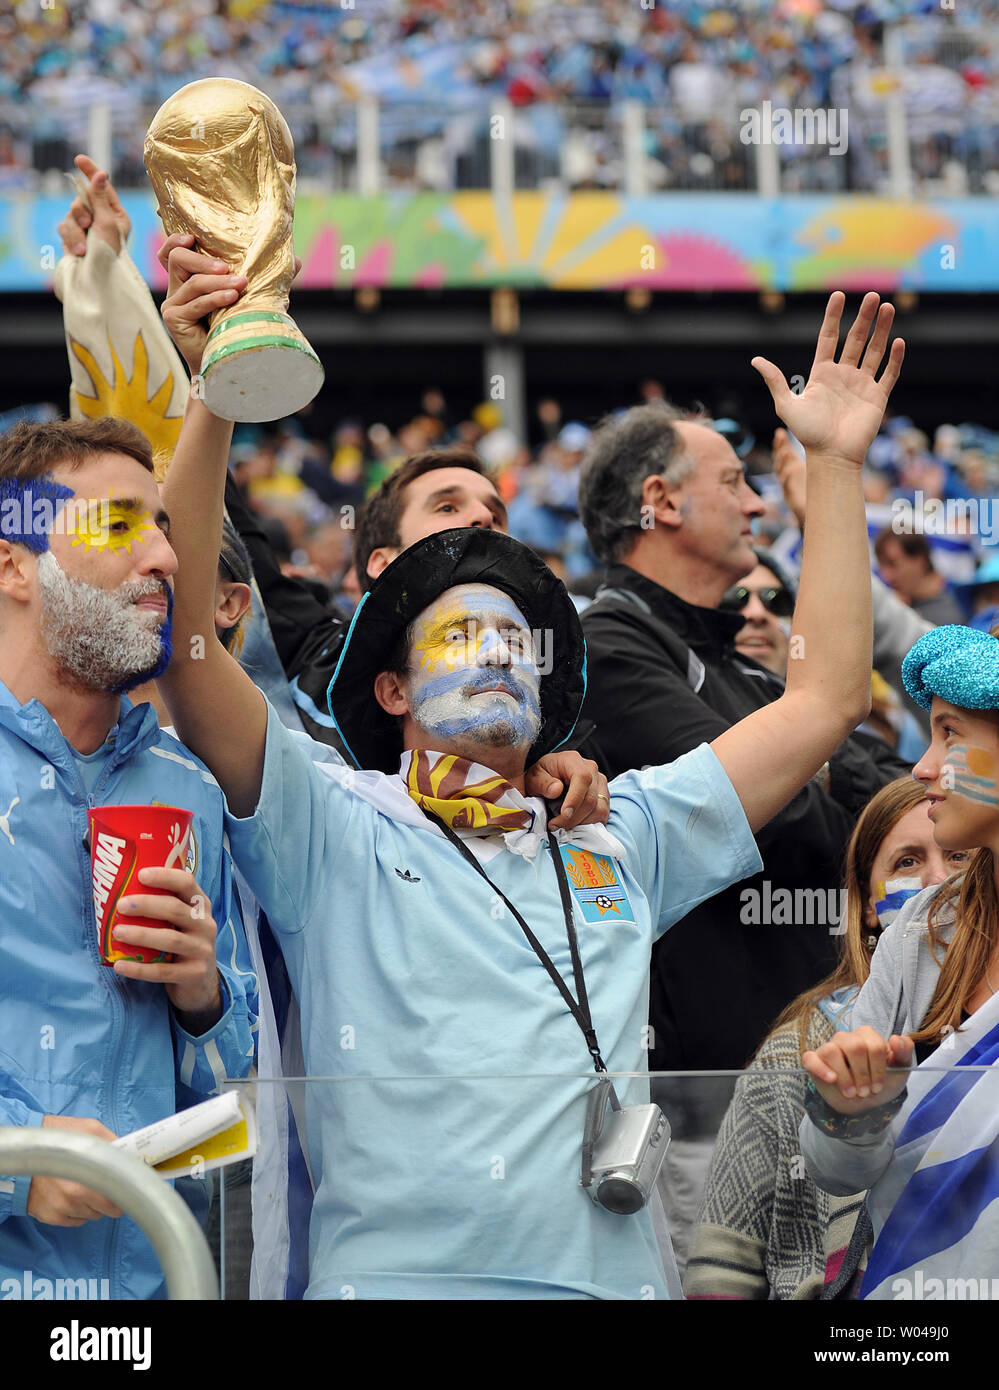 A Uruguay fan supports his team during the 2014 FIFA World Cup Group D match at the Arena Corinthians in Sao Paulo, Brazil on June 19, 2014. UPI/Chris Brunskill Stock Photo